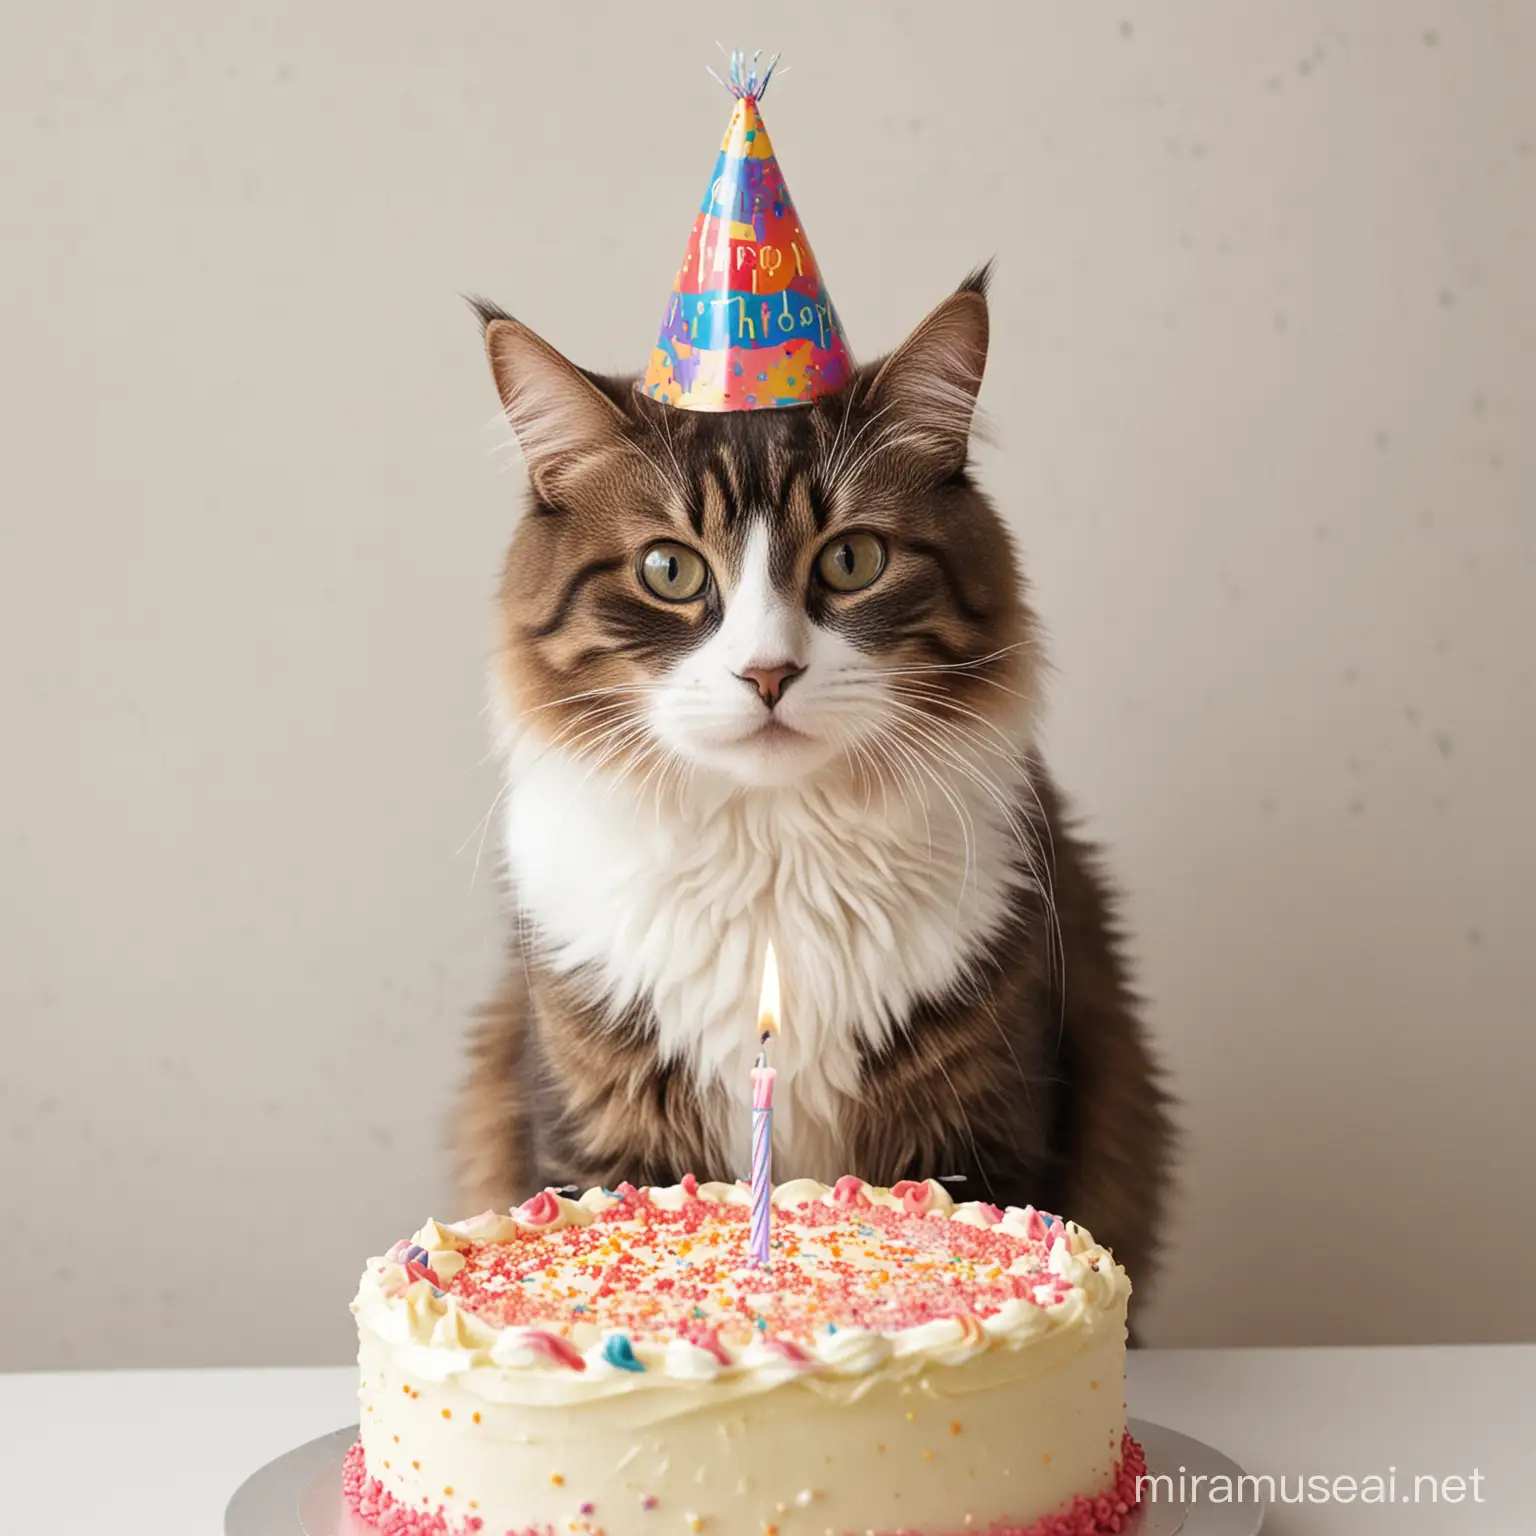 Colorful Birthday Celebration with a Playful Cat